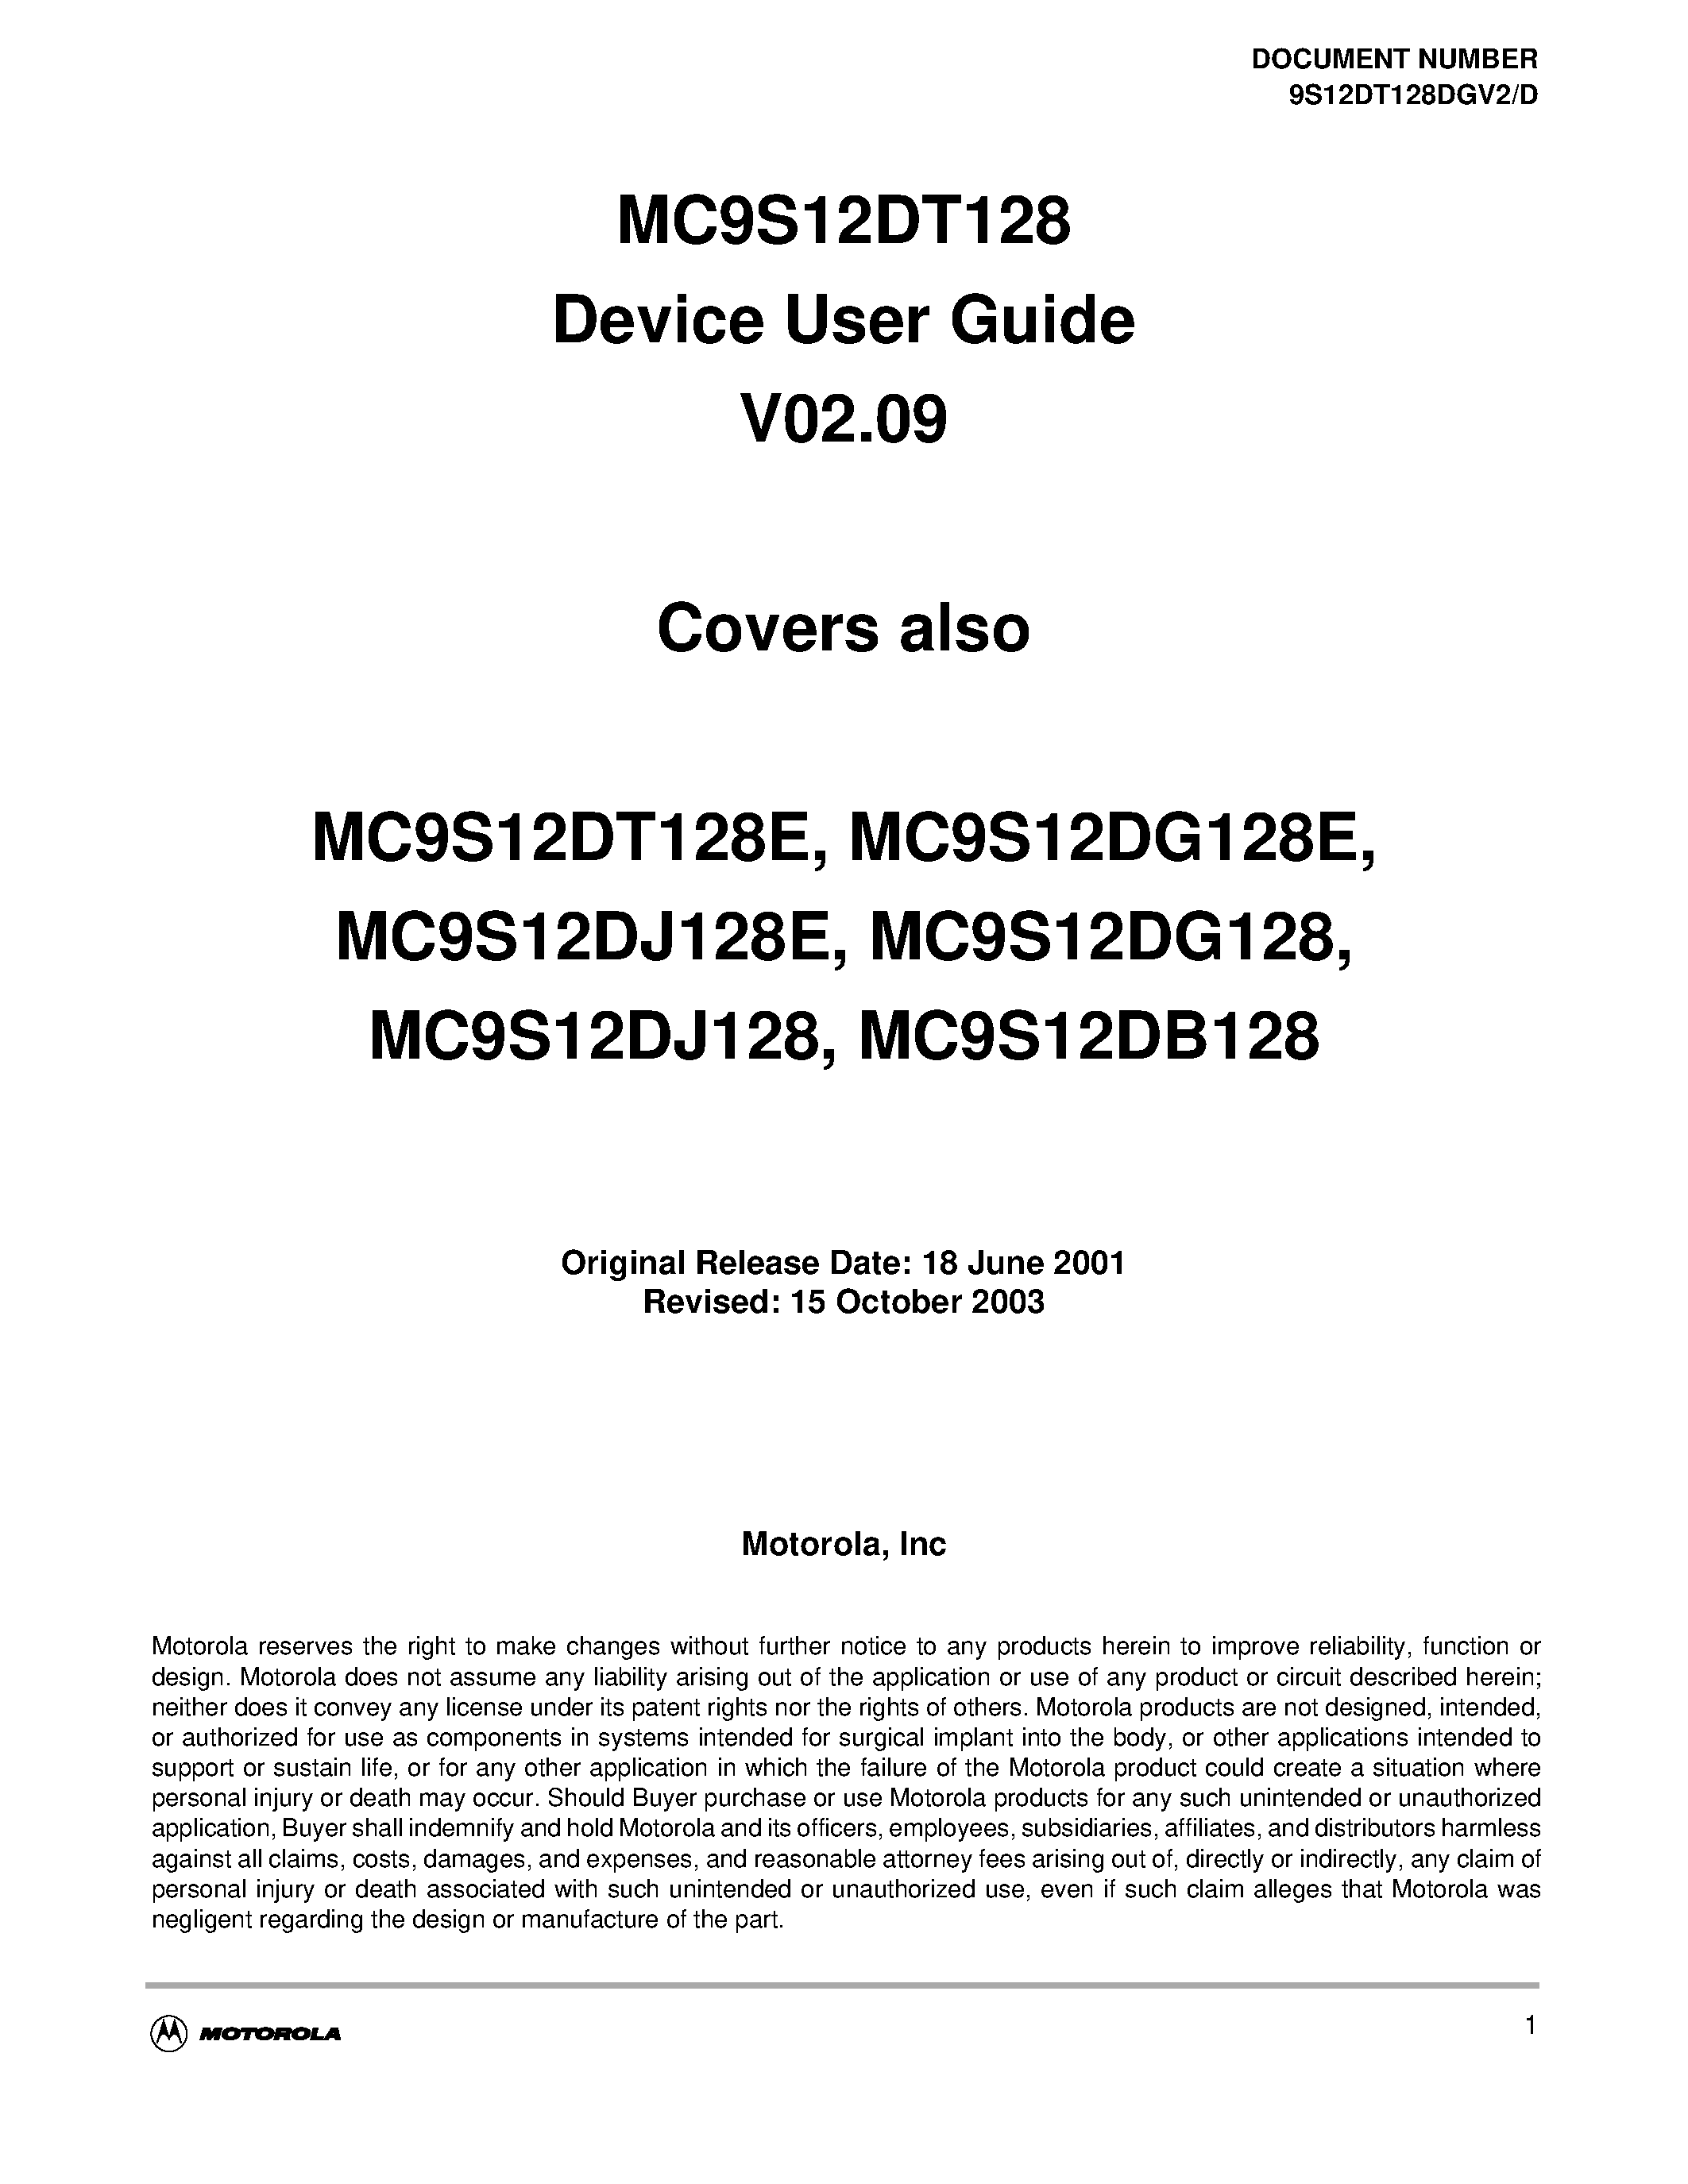 Datasheet SC515849 - MC9S12DT128 Device User Guide V02.09 page 1